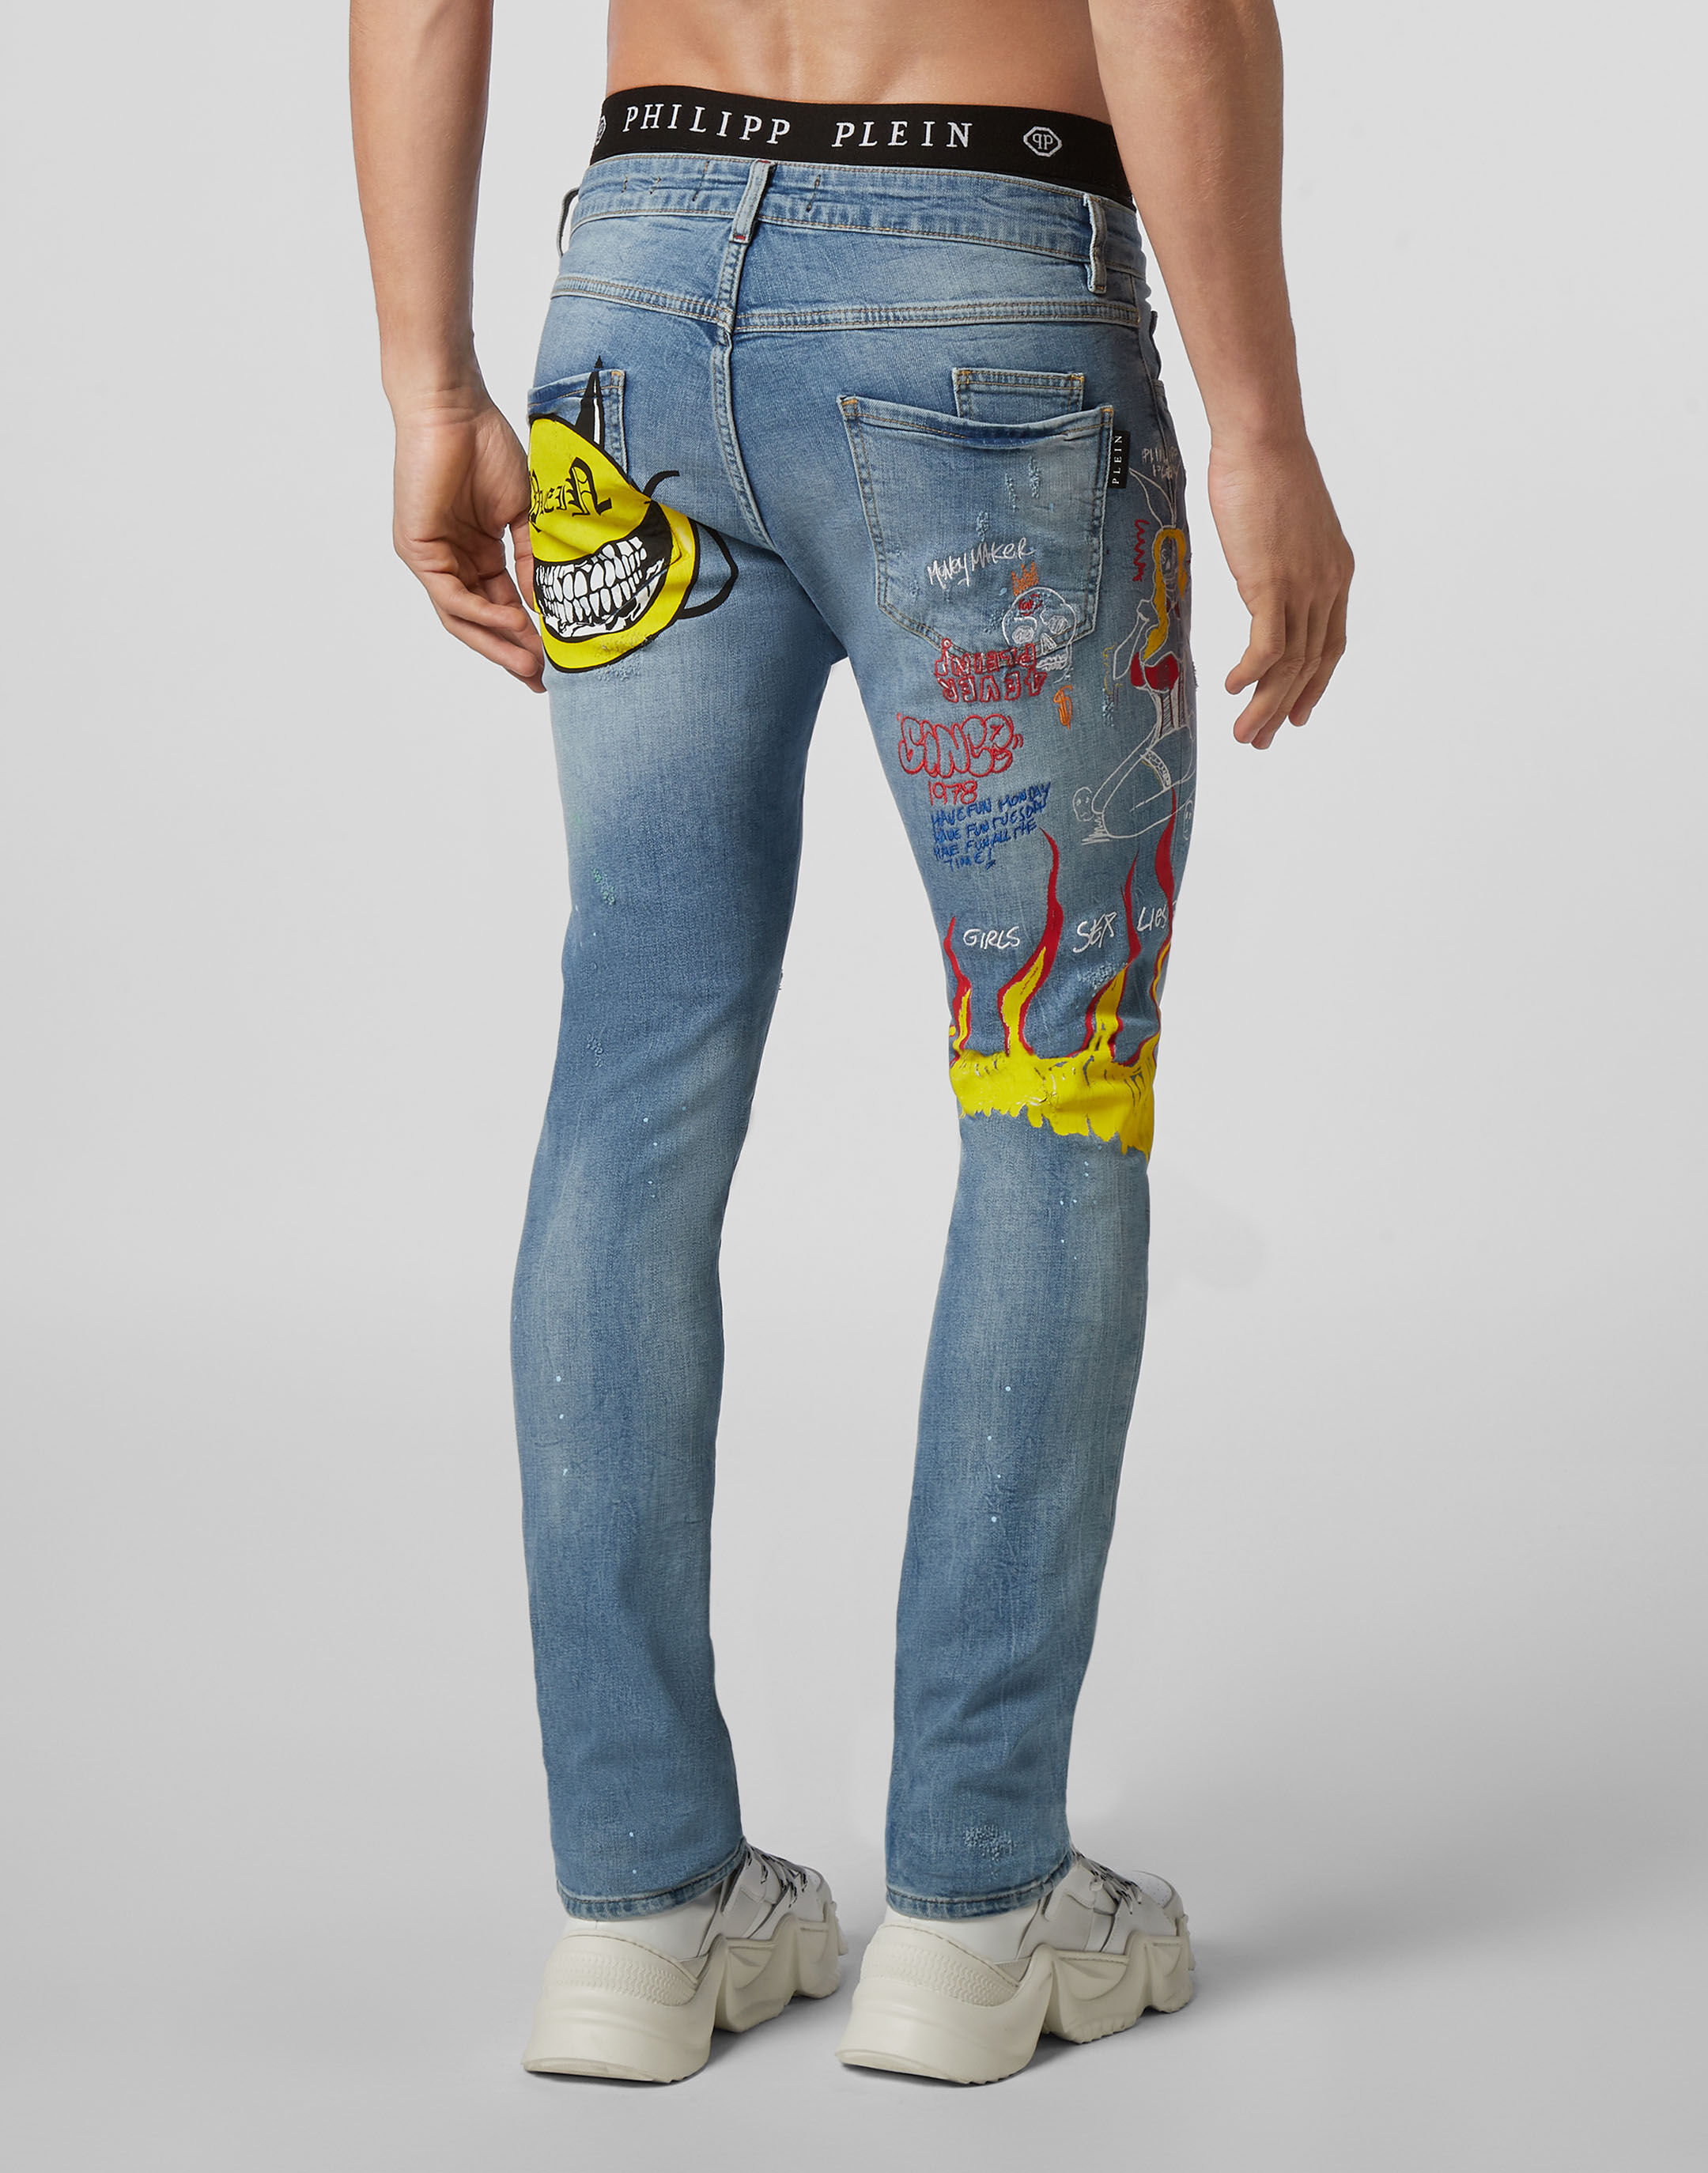 philipp plein jeans in south africa